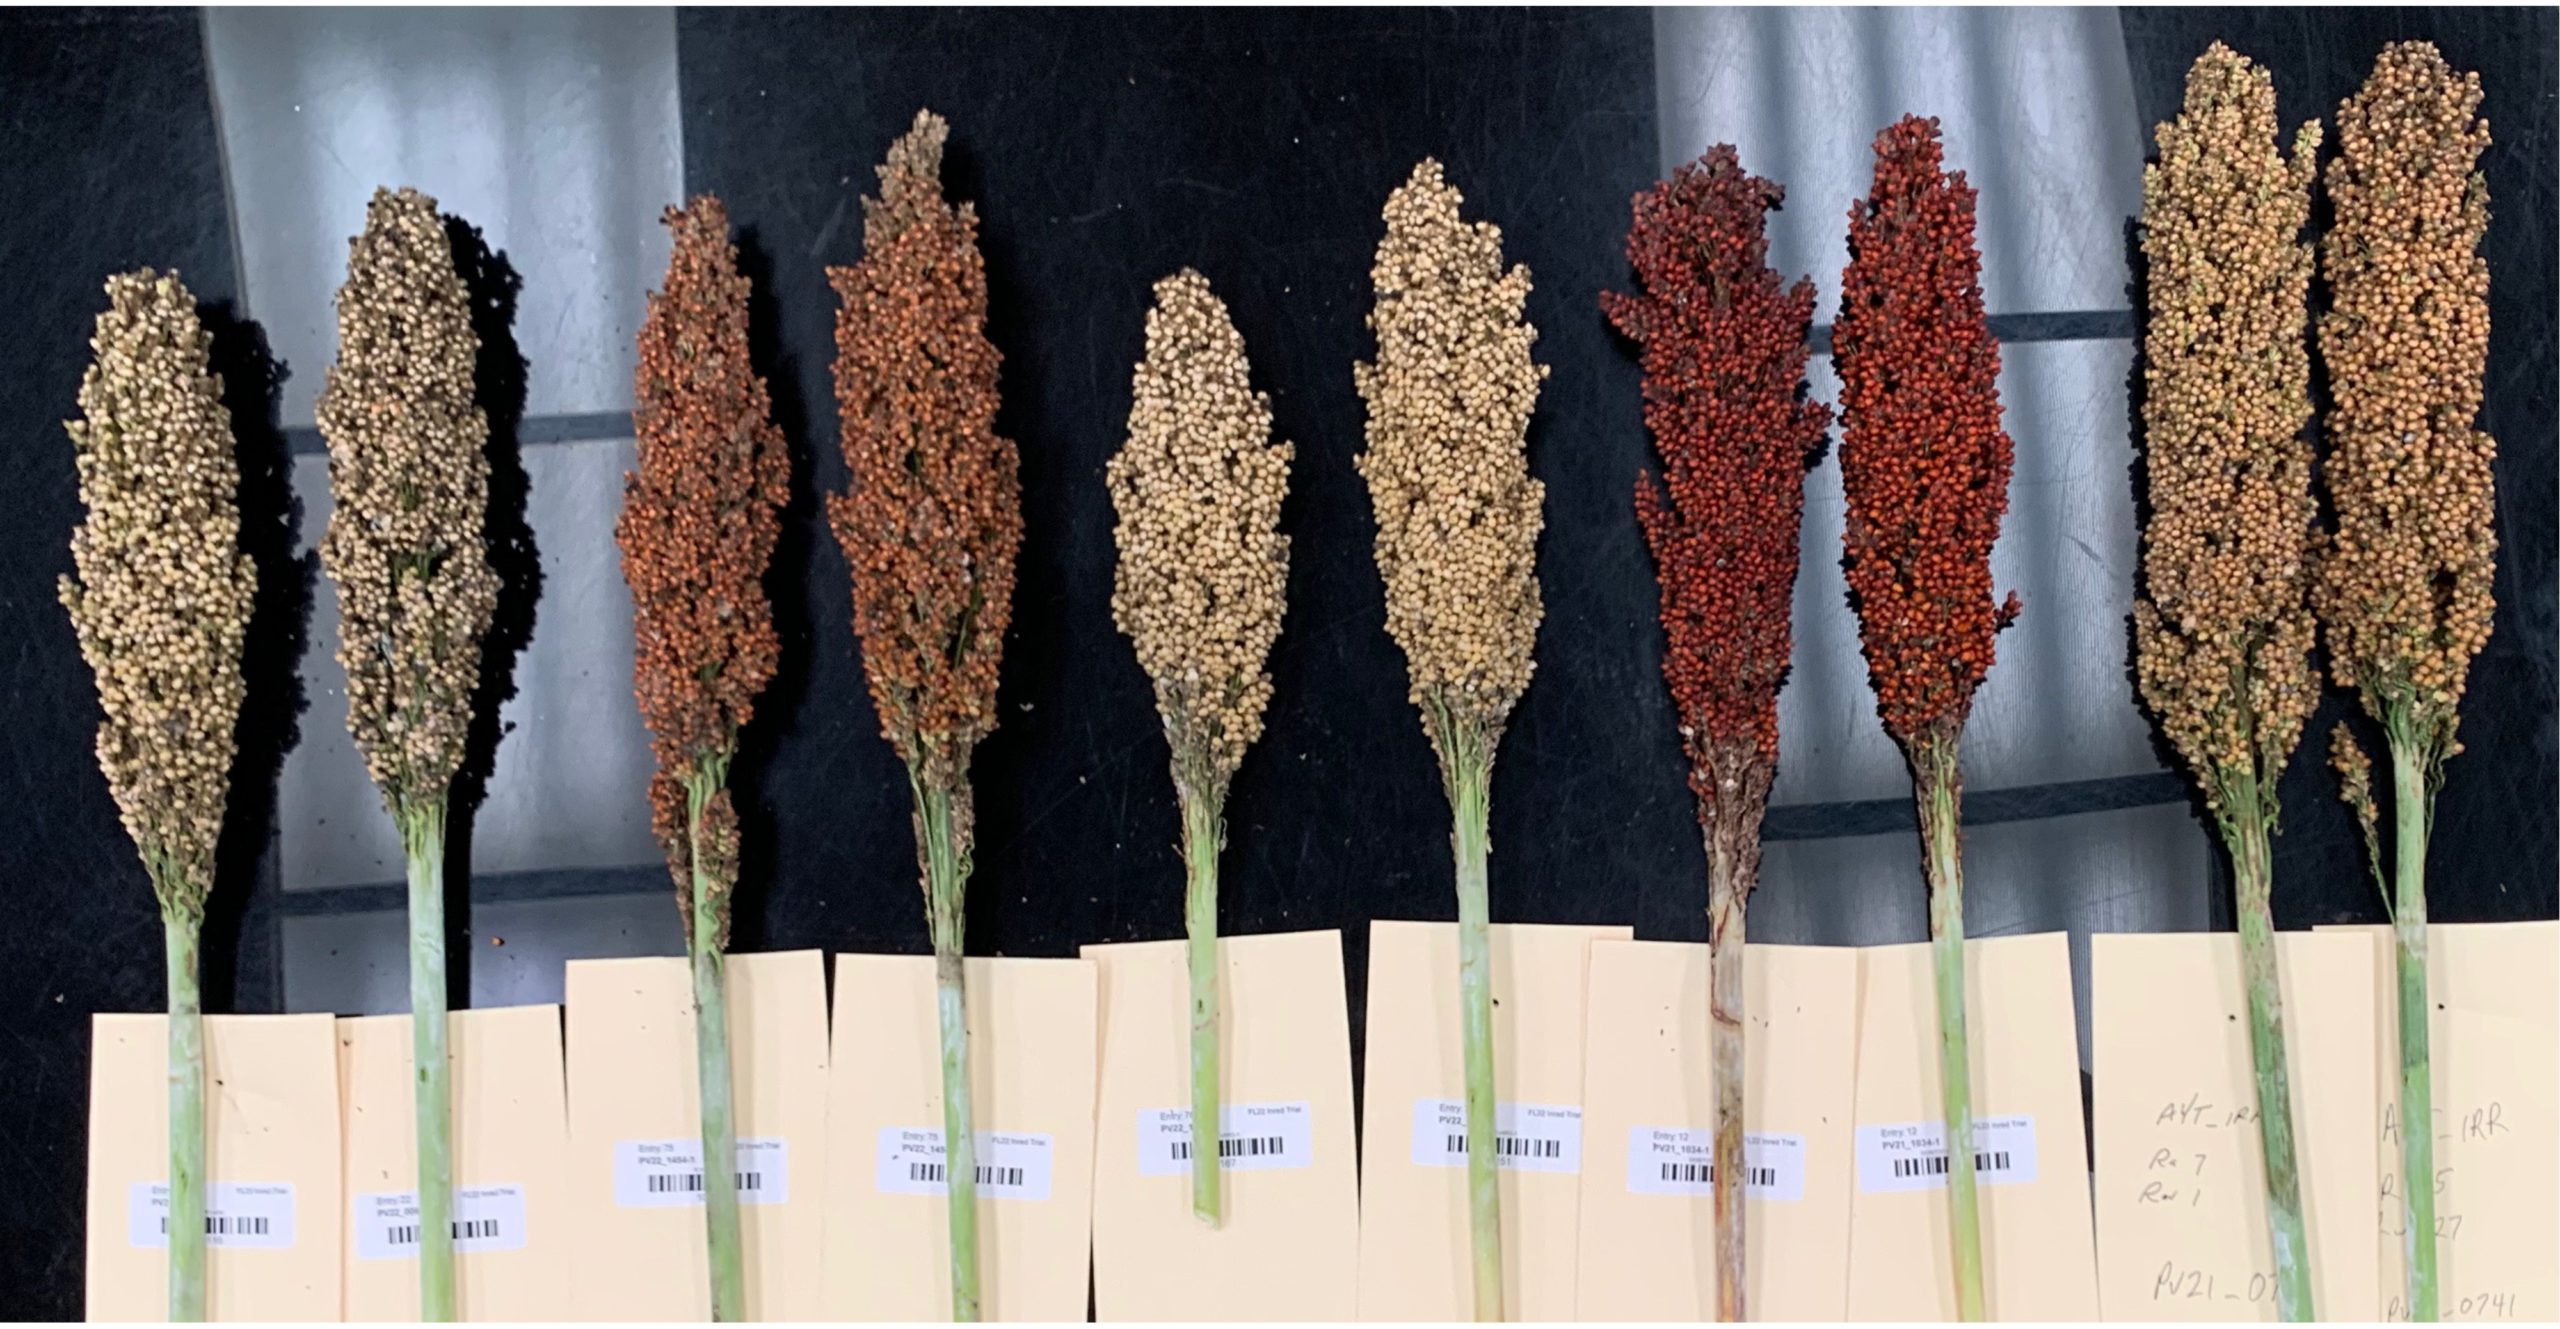 Individual sorghum panicles were harvested in August 2022 for compositional and metabolomic analyses to determine changes in nutrients and metabolites that affect grain quality.